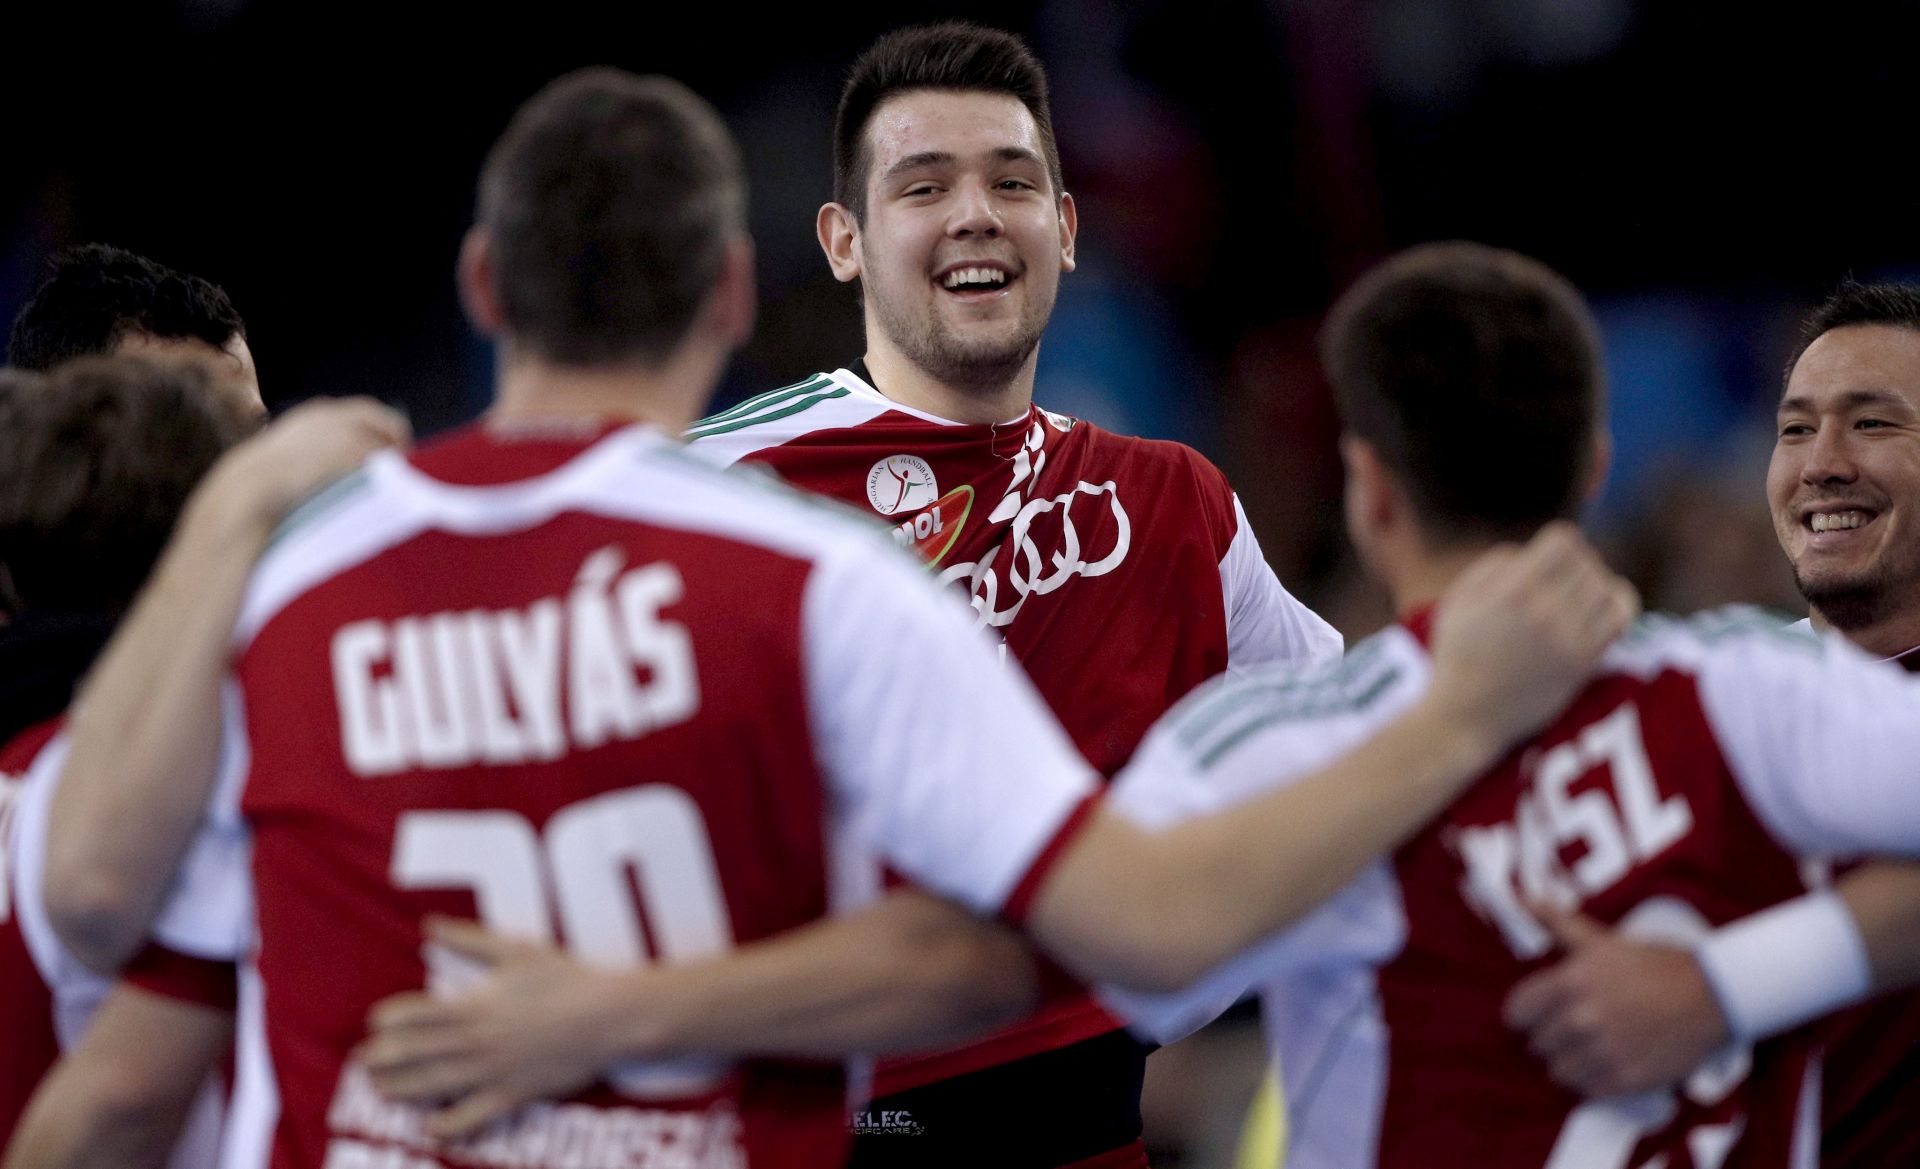 epa05727756 Hungarian players celebrate their win after the preliminary round match between Saudi Arabia and Hungary at the IHF Men's Handball World Championship, in Rouen, France, 18 January 2017.  EPA/YOAN VALAT